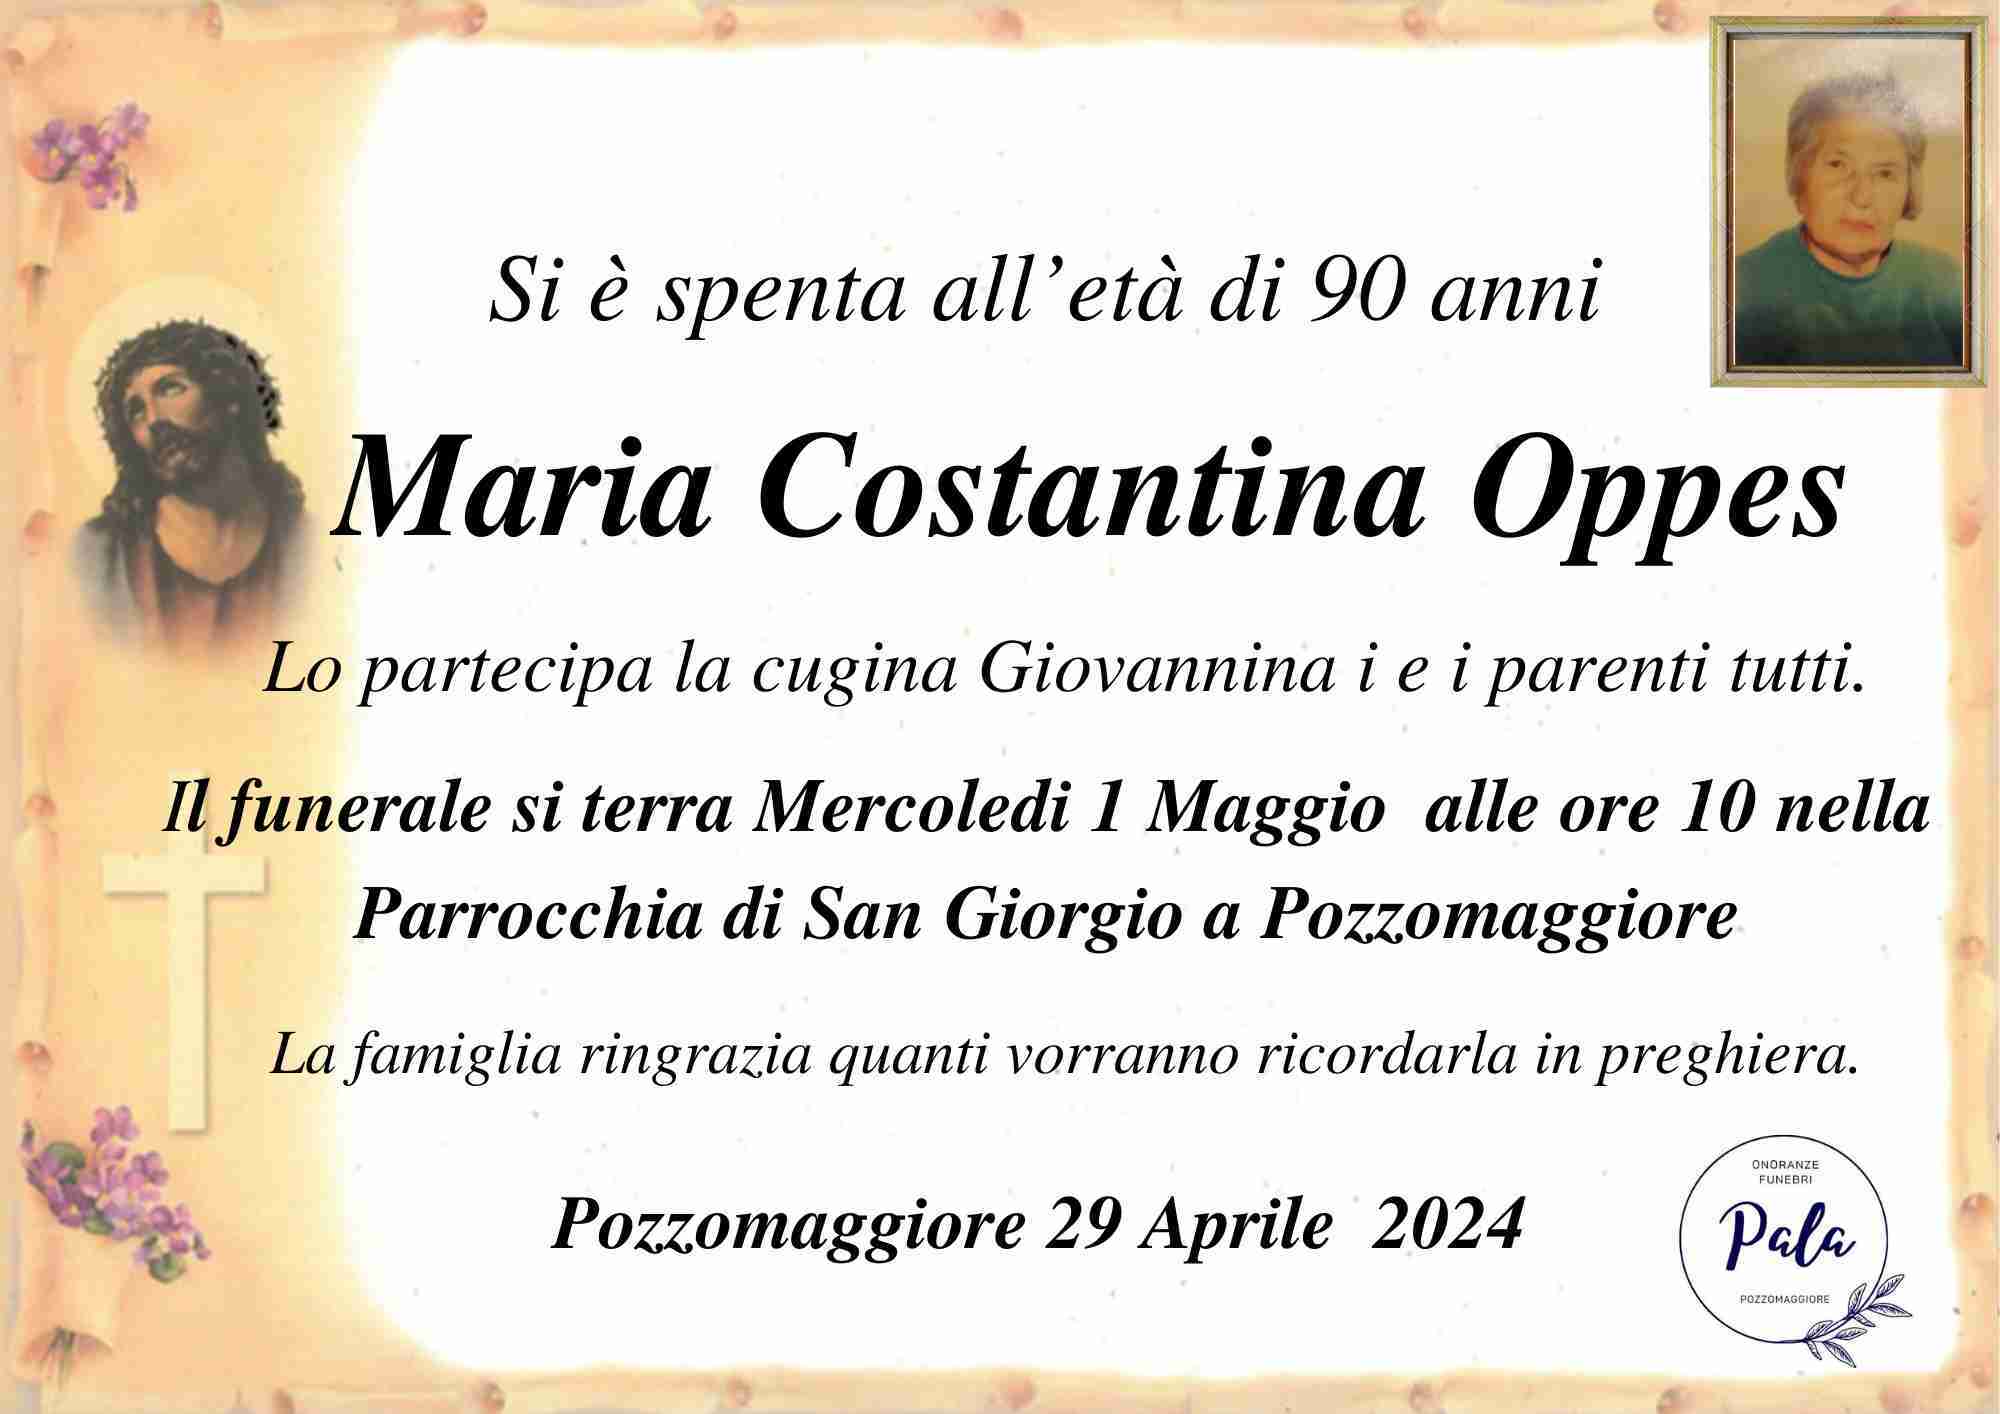 Maria Costantina Oppes